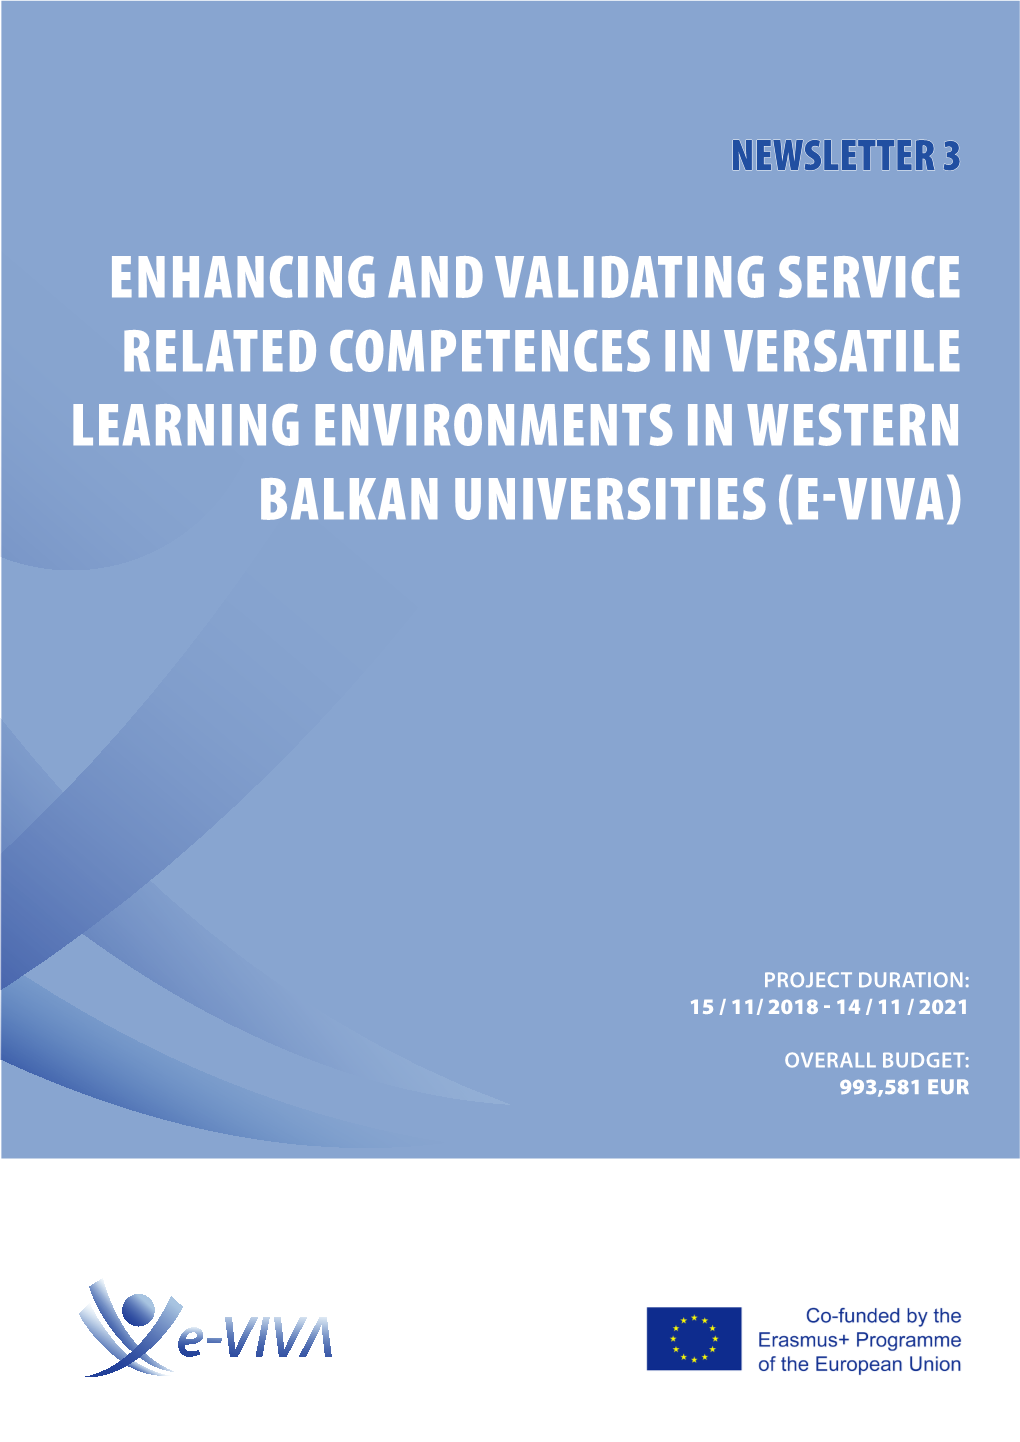 Enhancing and Validating Service Related Competences in Versatile Learning Environments in Western Balkan Universities (E-Viva)